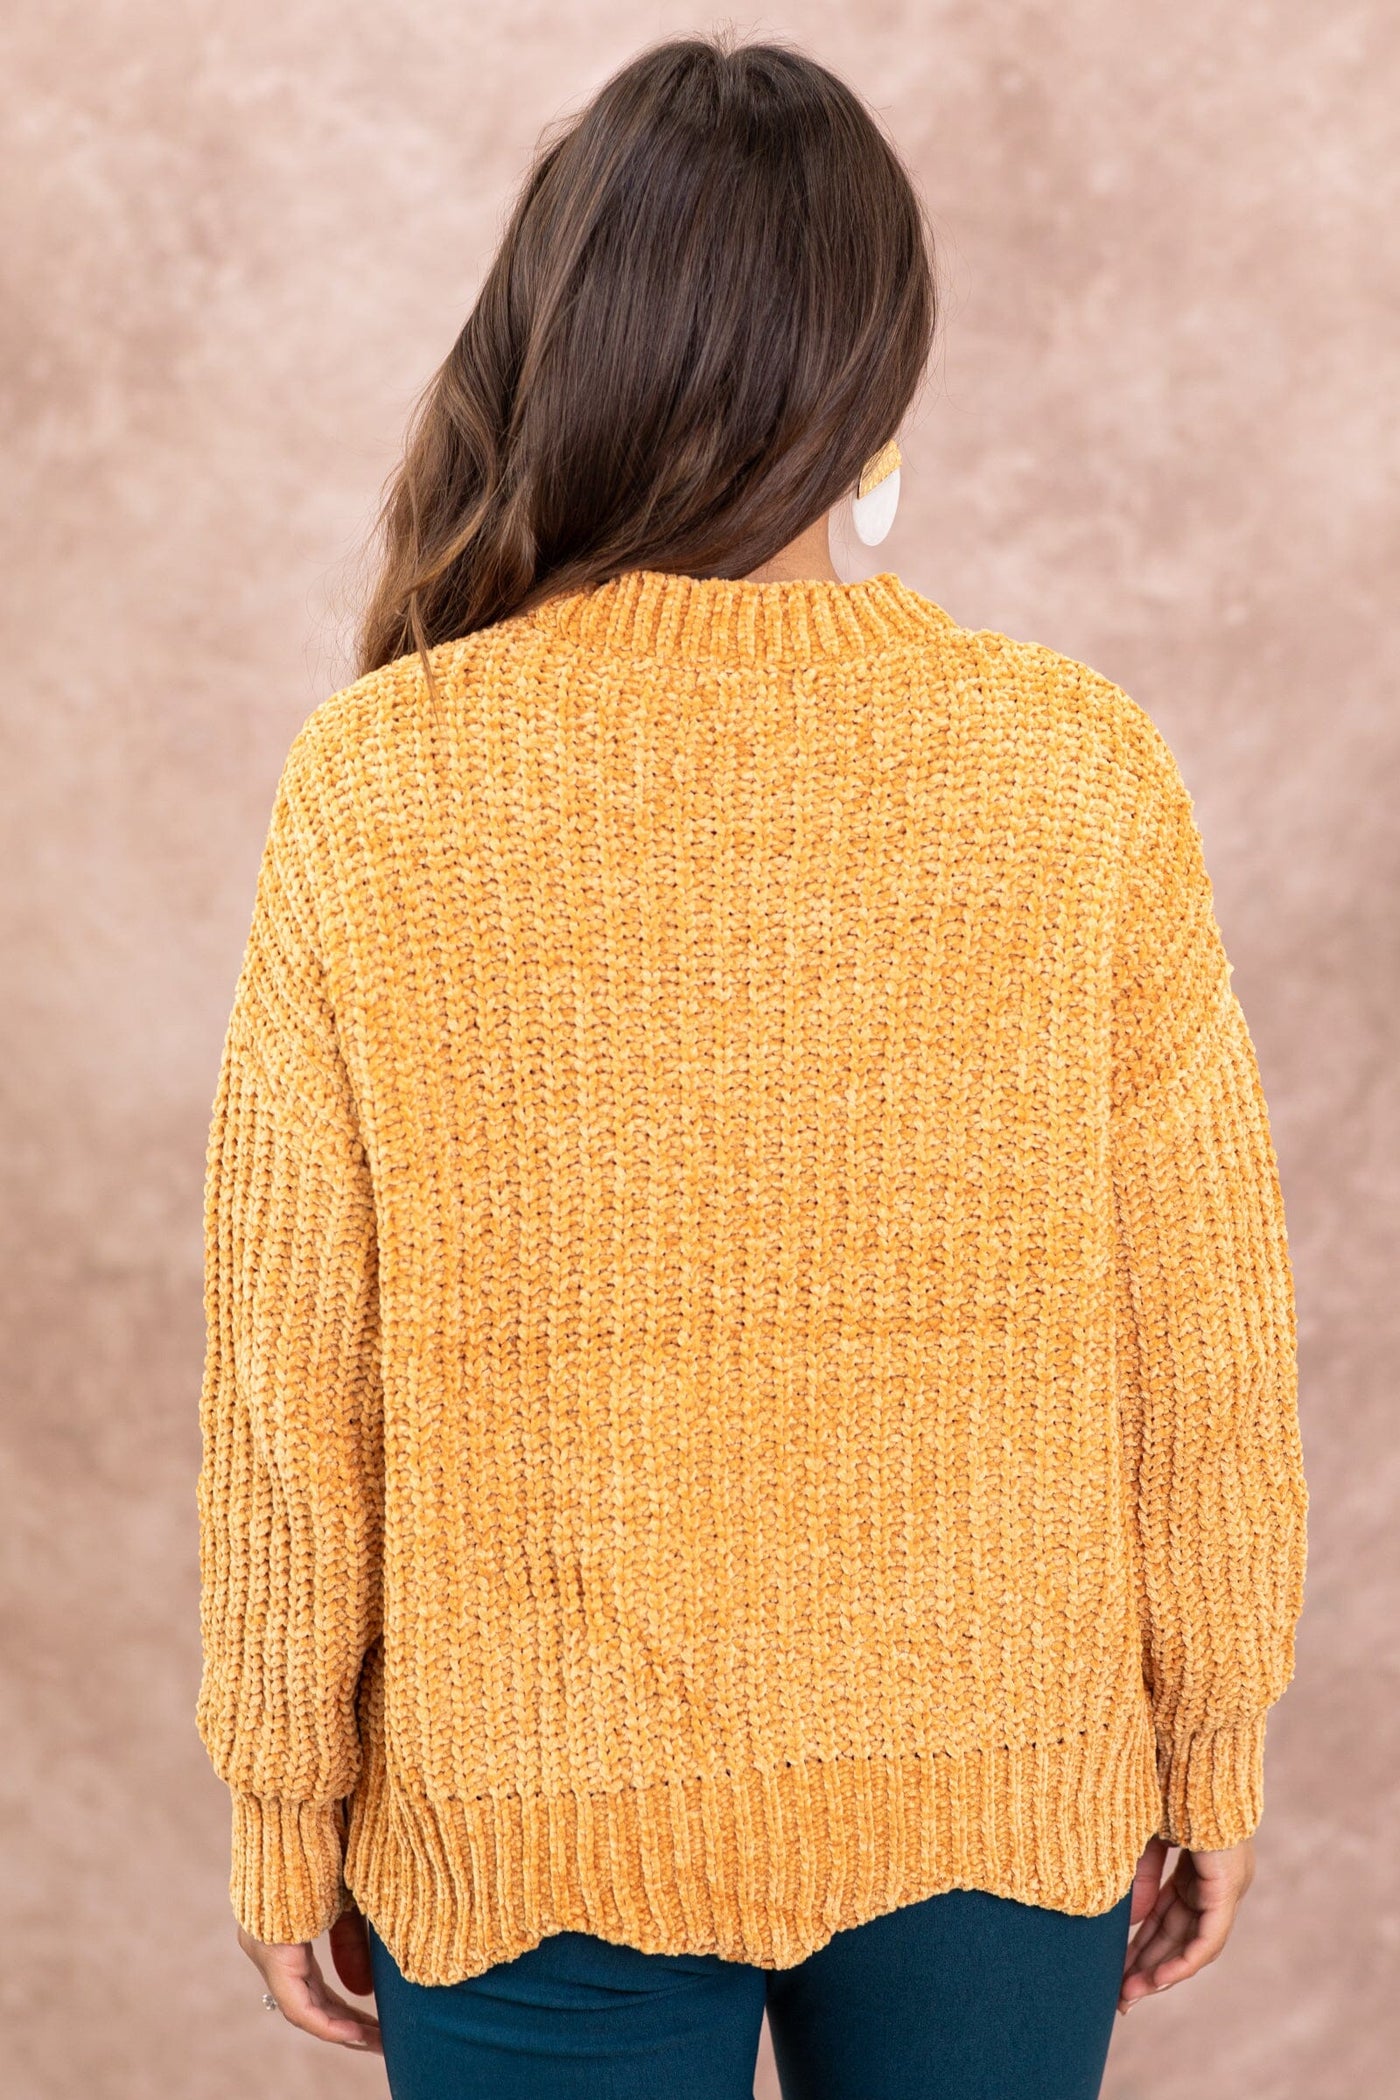 Copper Ribbed Sweater With Scallop Trim - Filly Flair